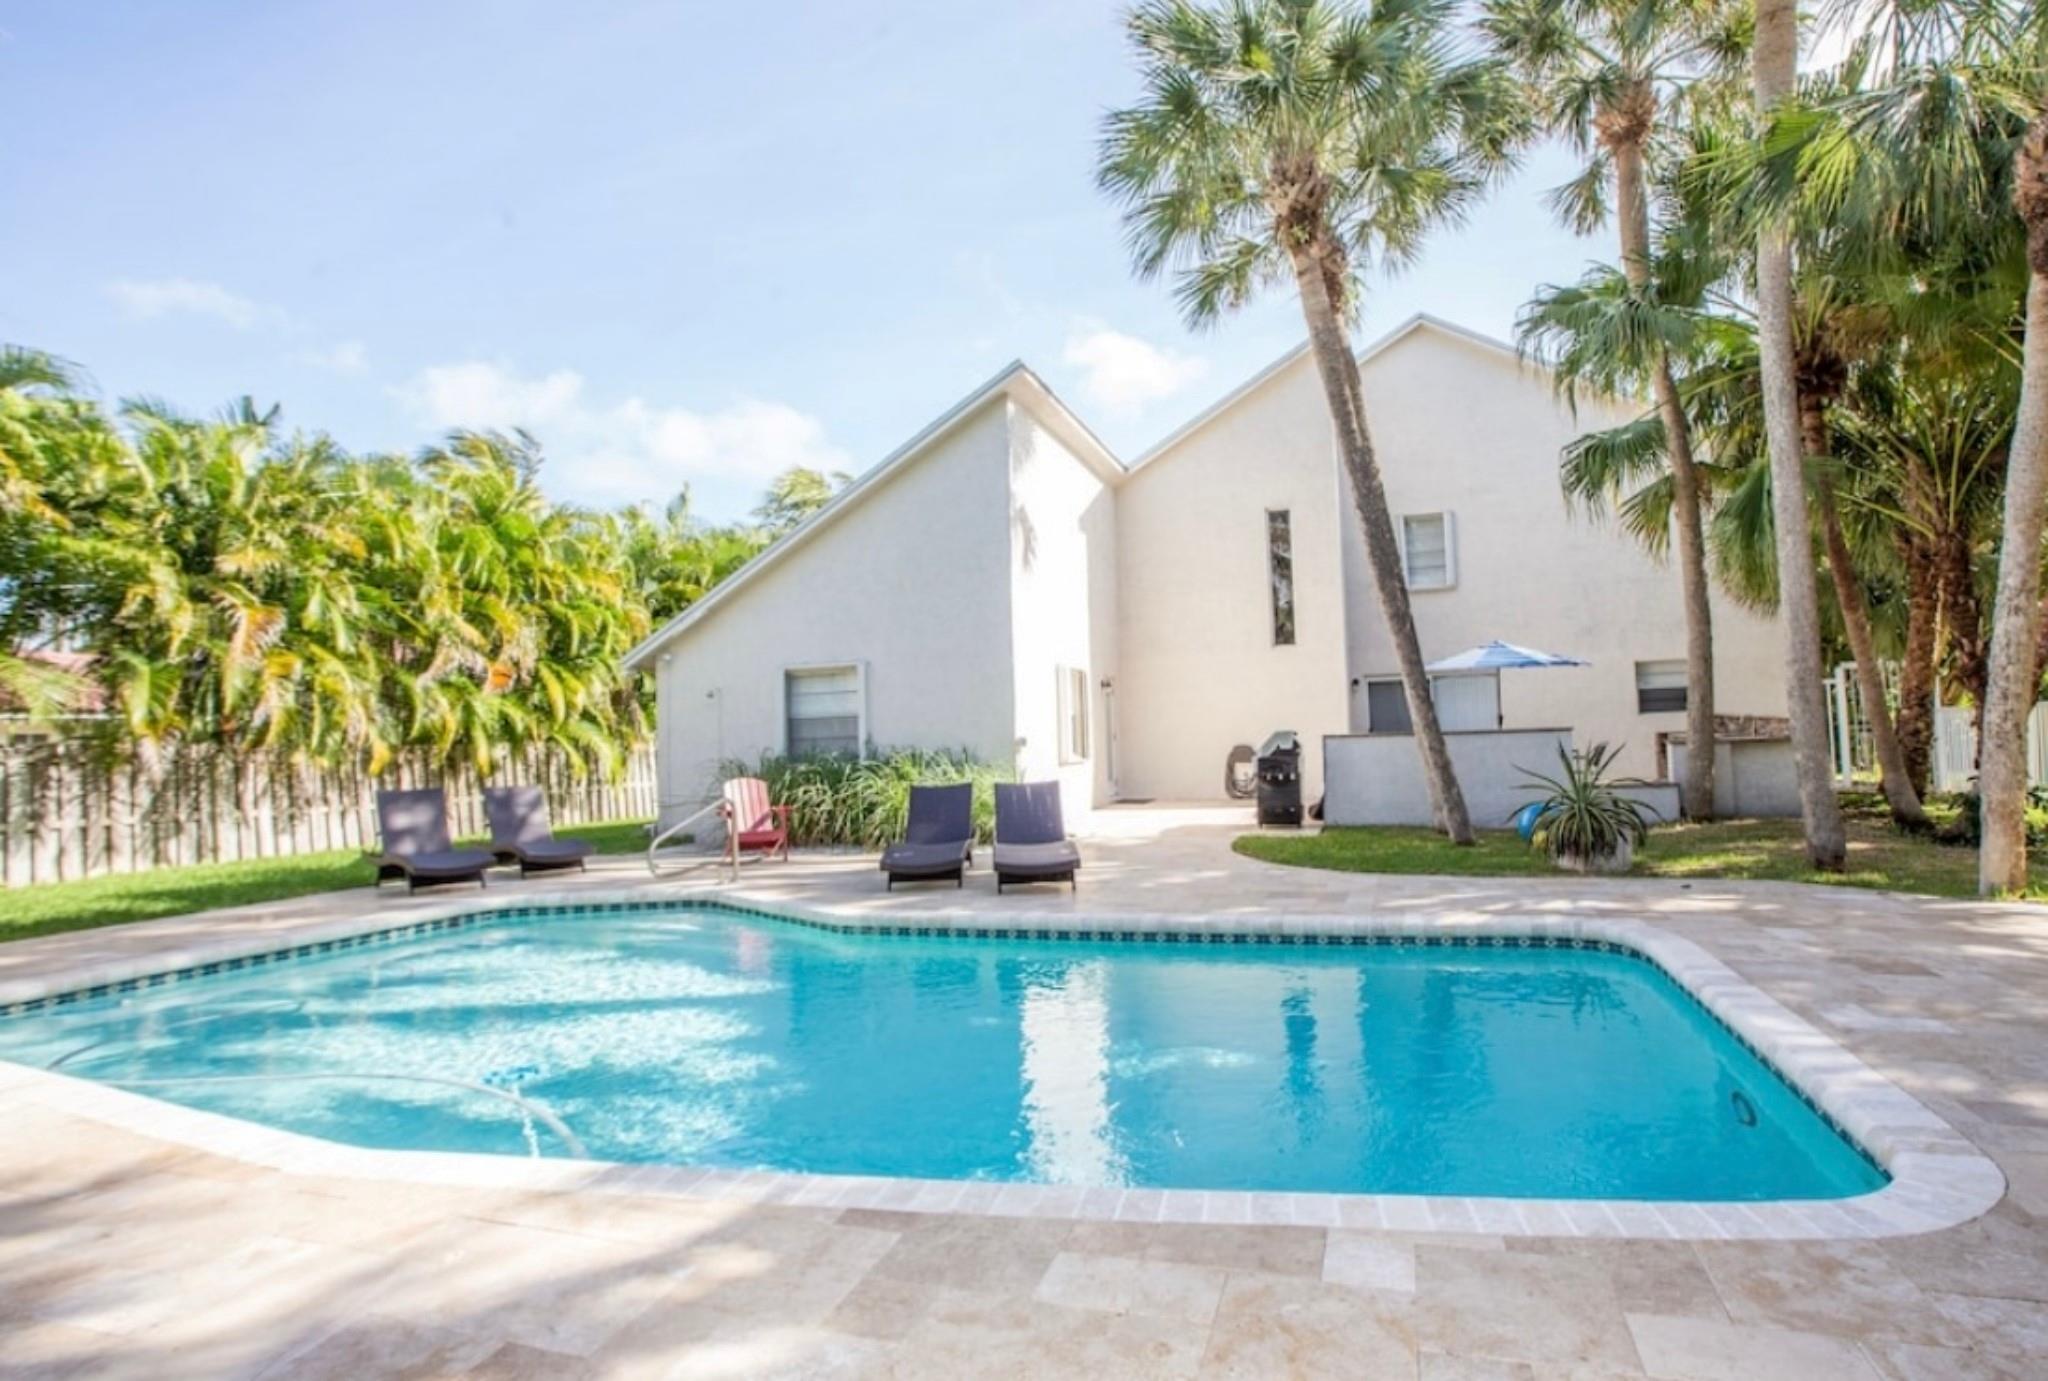 Beautiful 4-Bedroom 3- Bath house, plus office room located across the street from the beach, on over size lot with heated pool. Updated Kitchen, bathrooms, and marble floors. The house has 2 AC systems. The master-bedroom has views of the Ocean.